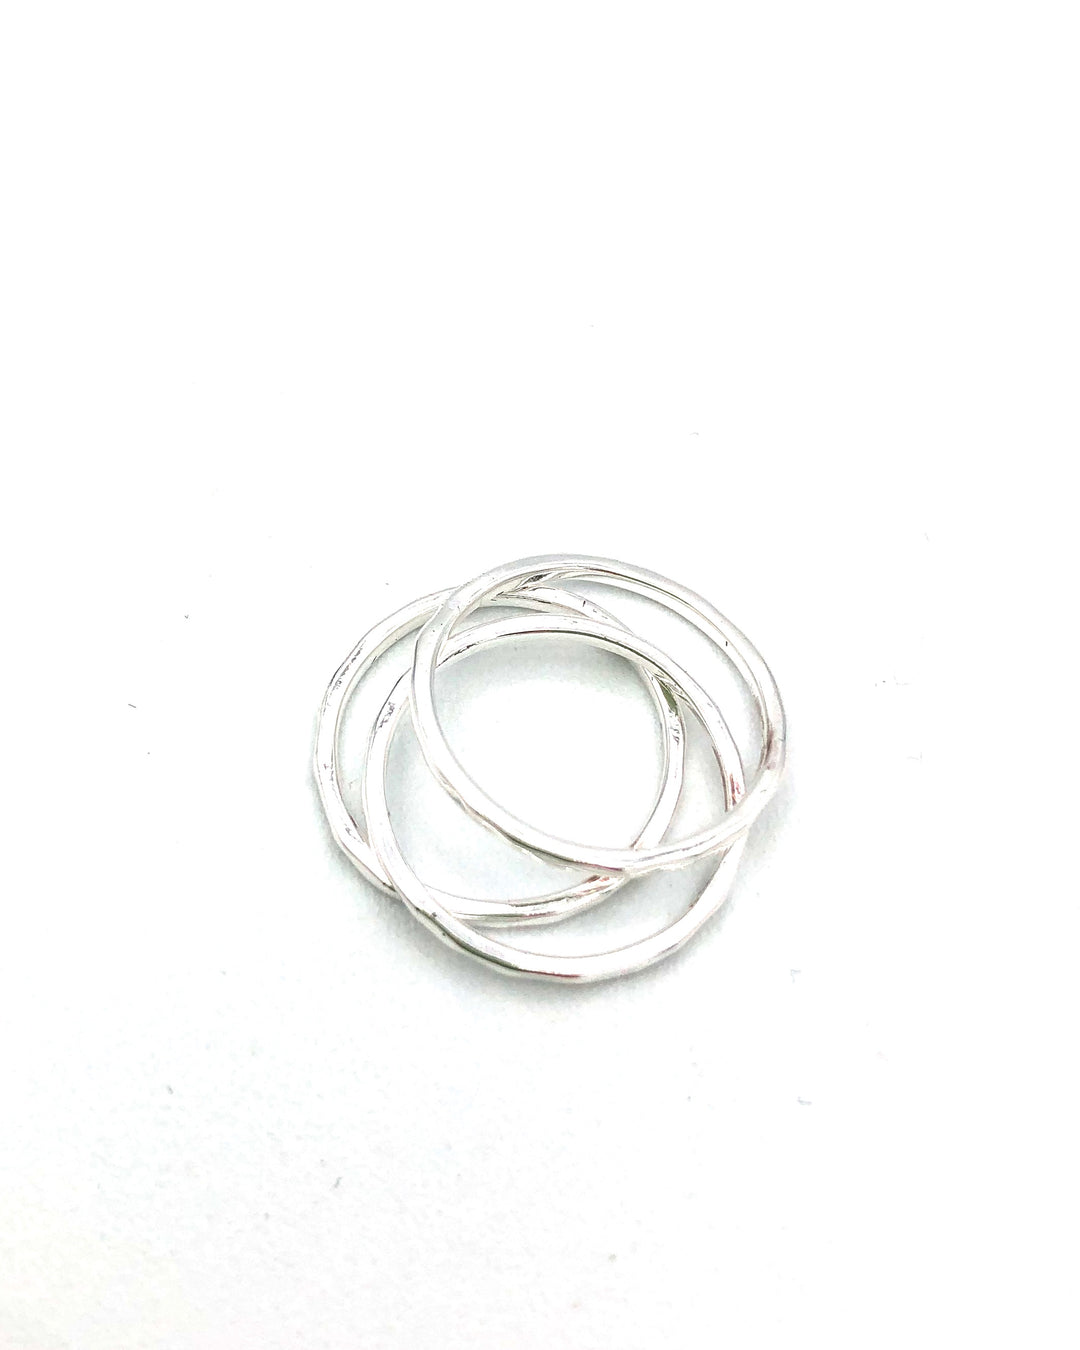 Simple Ring Stack of Three - Rose Gold or Silver - Size 3 or 4